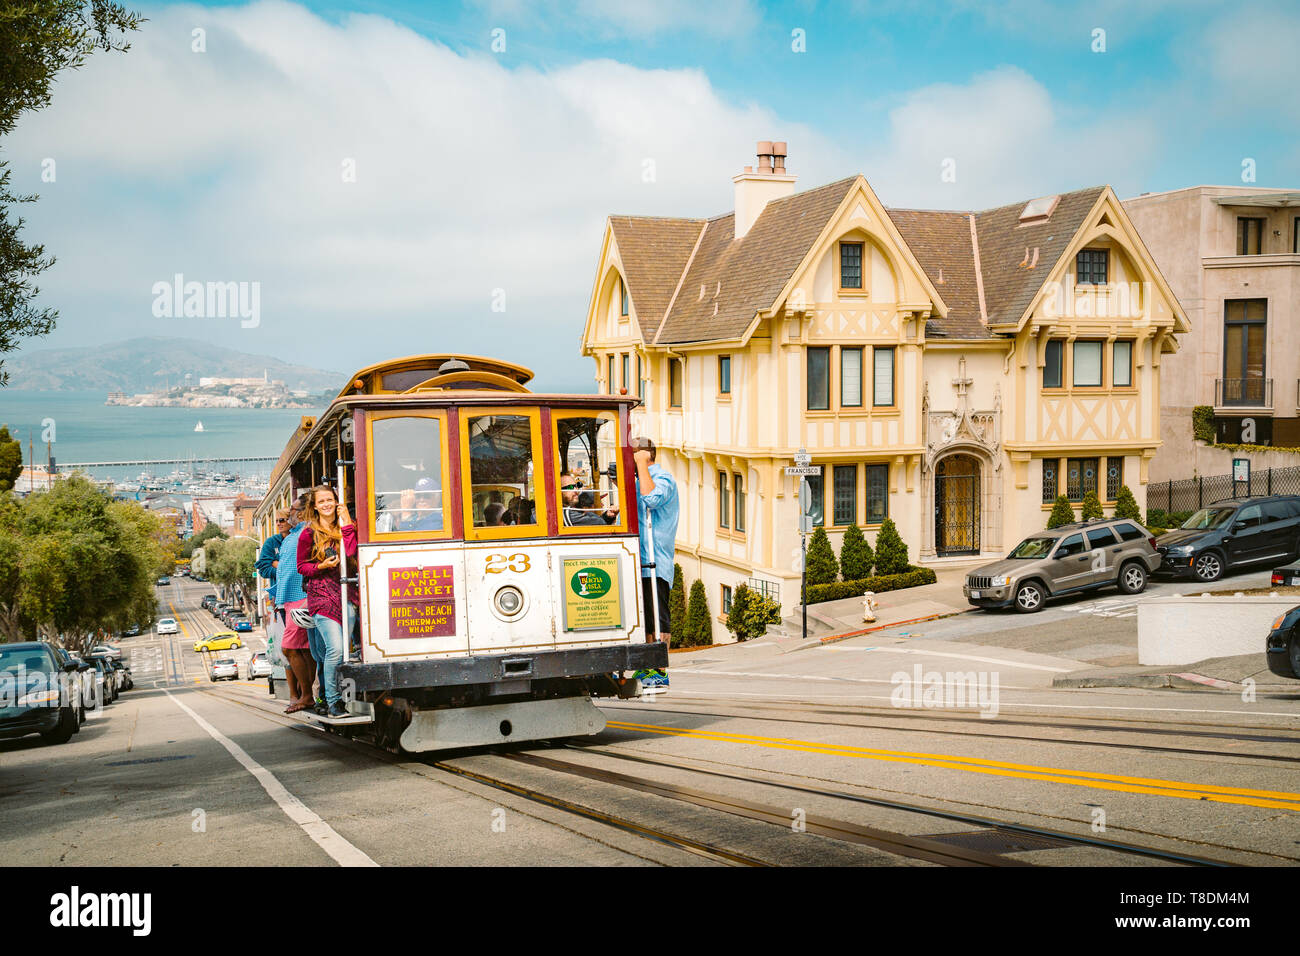 SAN FRANCISCO, USA - SEPTEMBER 3, 2016: Powell-Hyde cable car climbing up steep hill in central San Francisco with famous Alcatraz Island in the backg Stock Photo